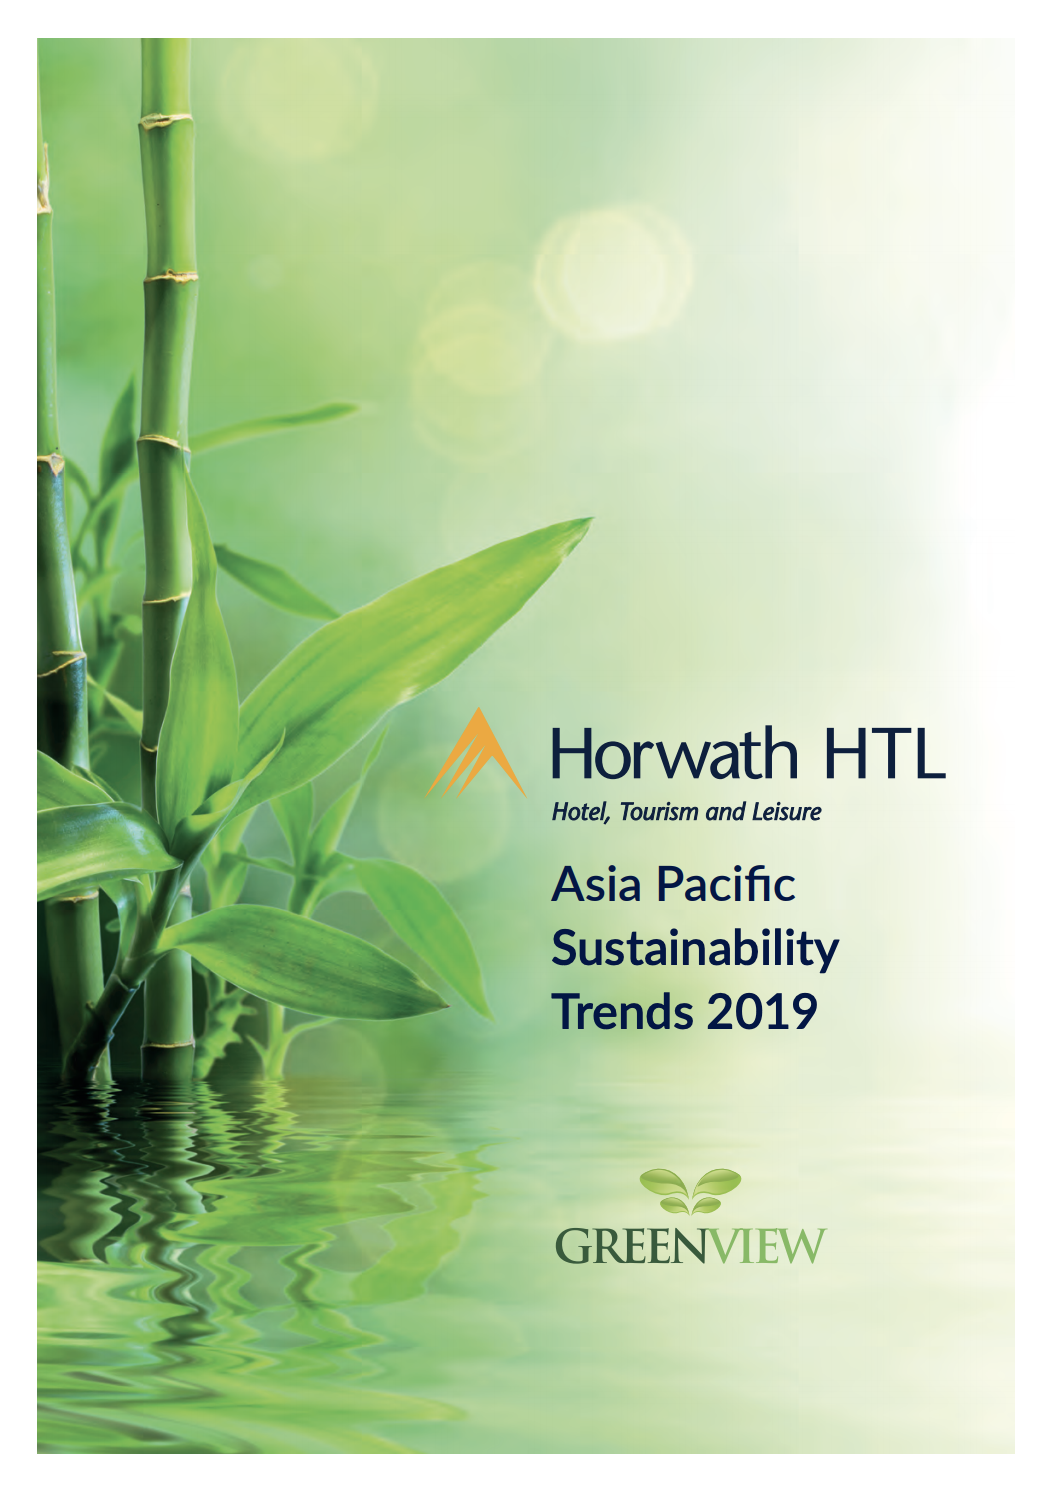 Asia Pacific: Sustainability Data Trends 2019